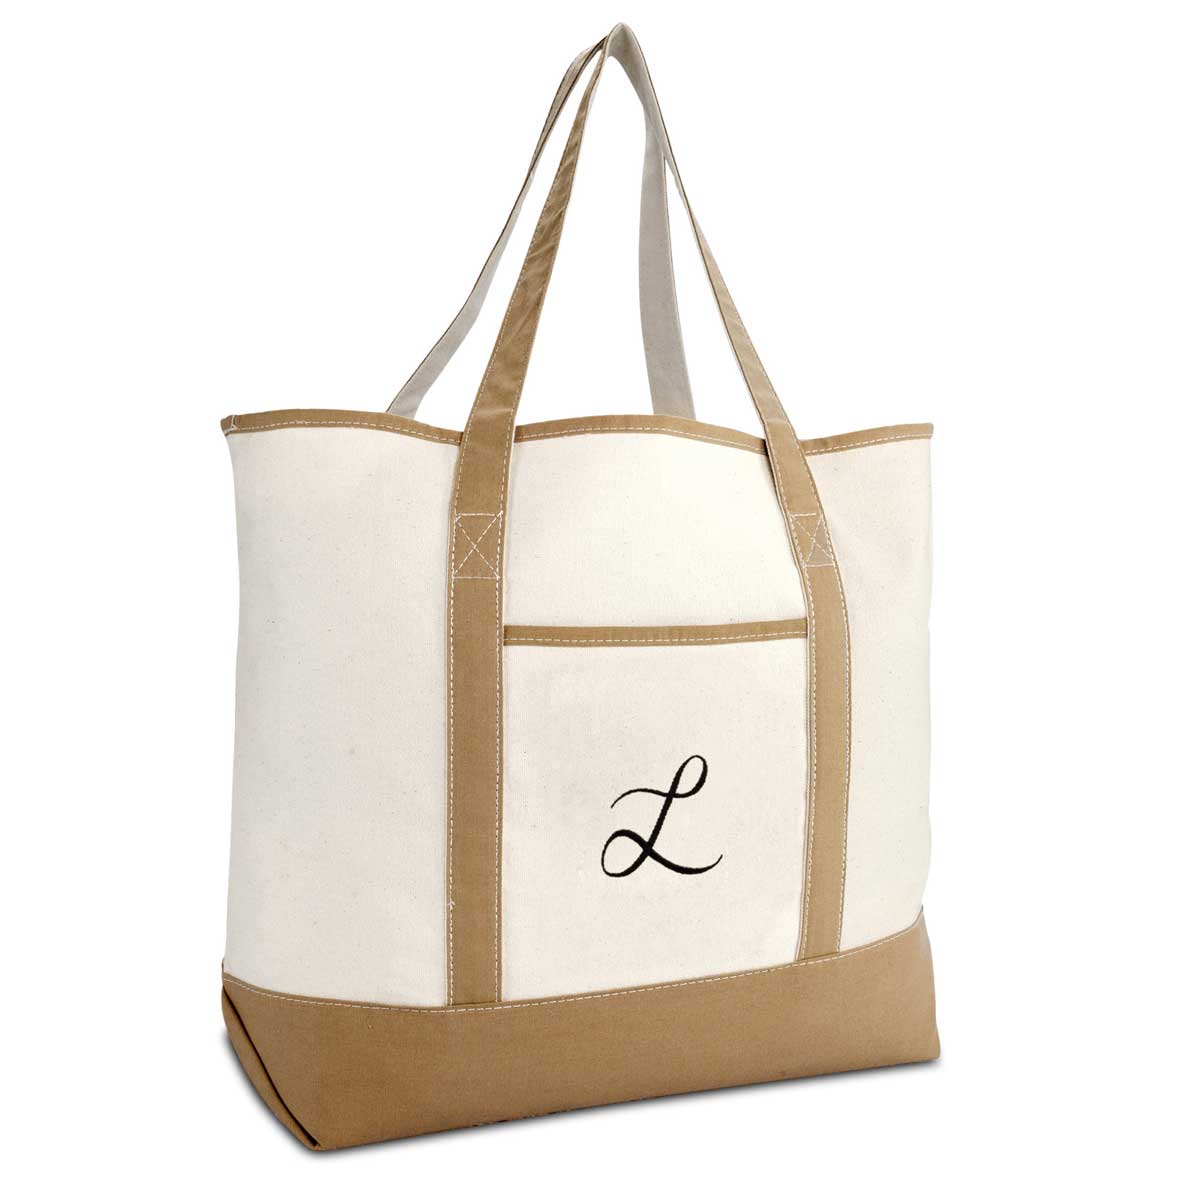 Dalix  Women's Natural Tote Bag Shoulder Bags Brown With Monogram Letter A-Z